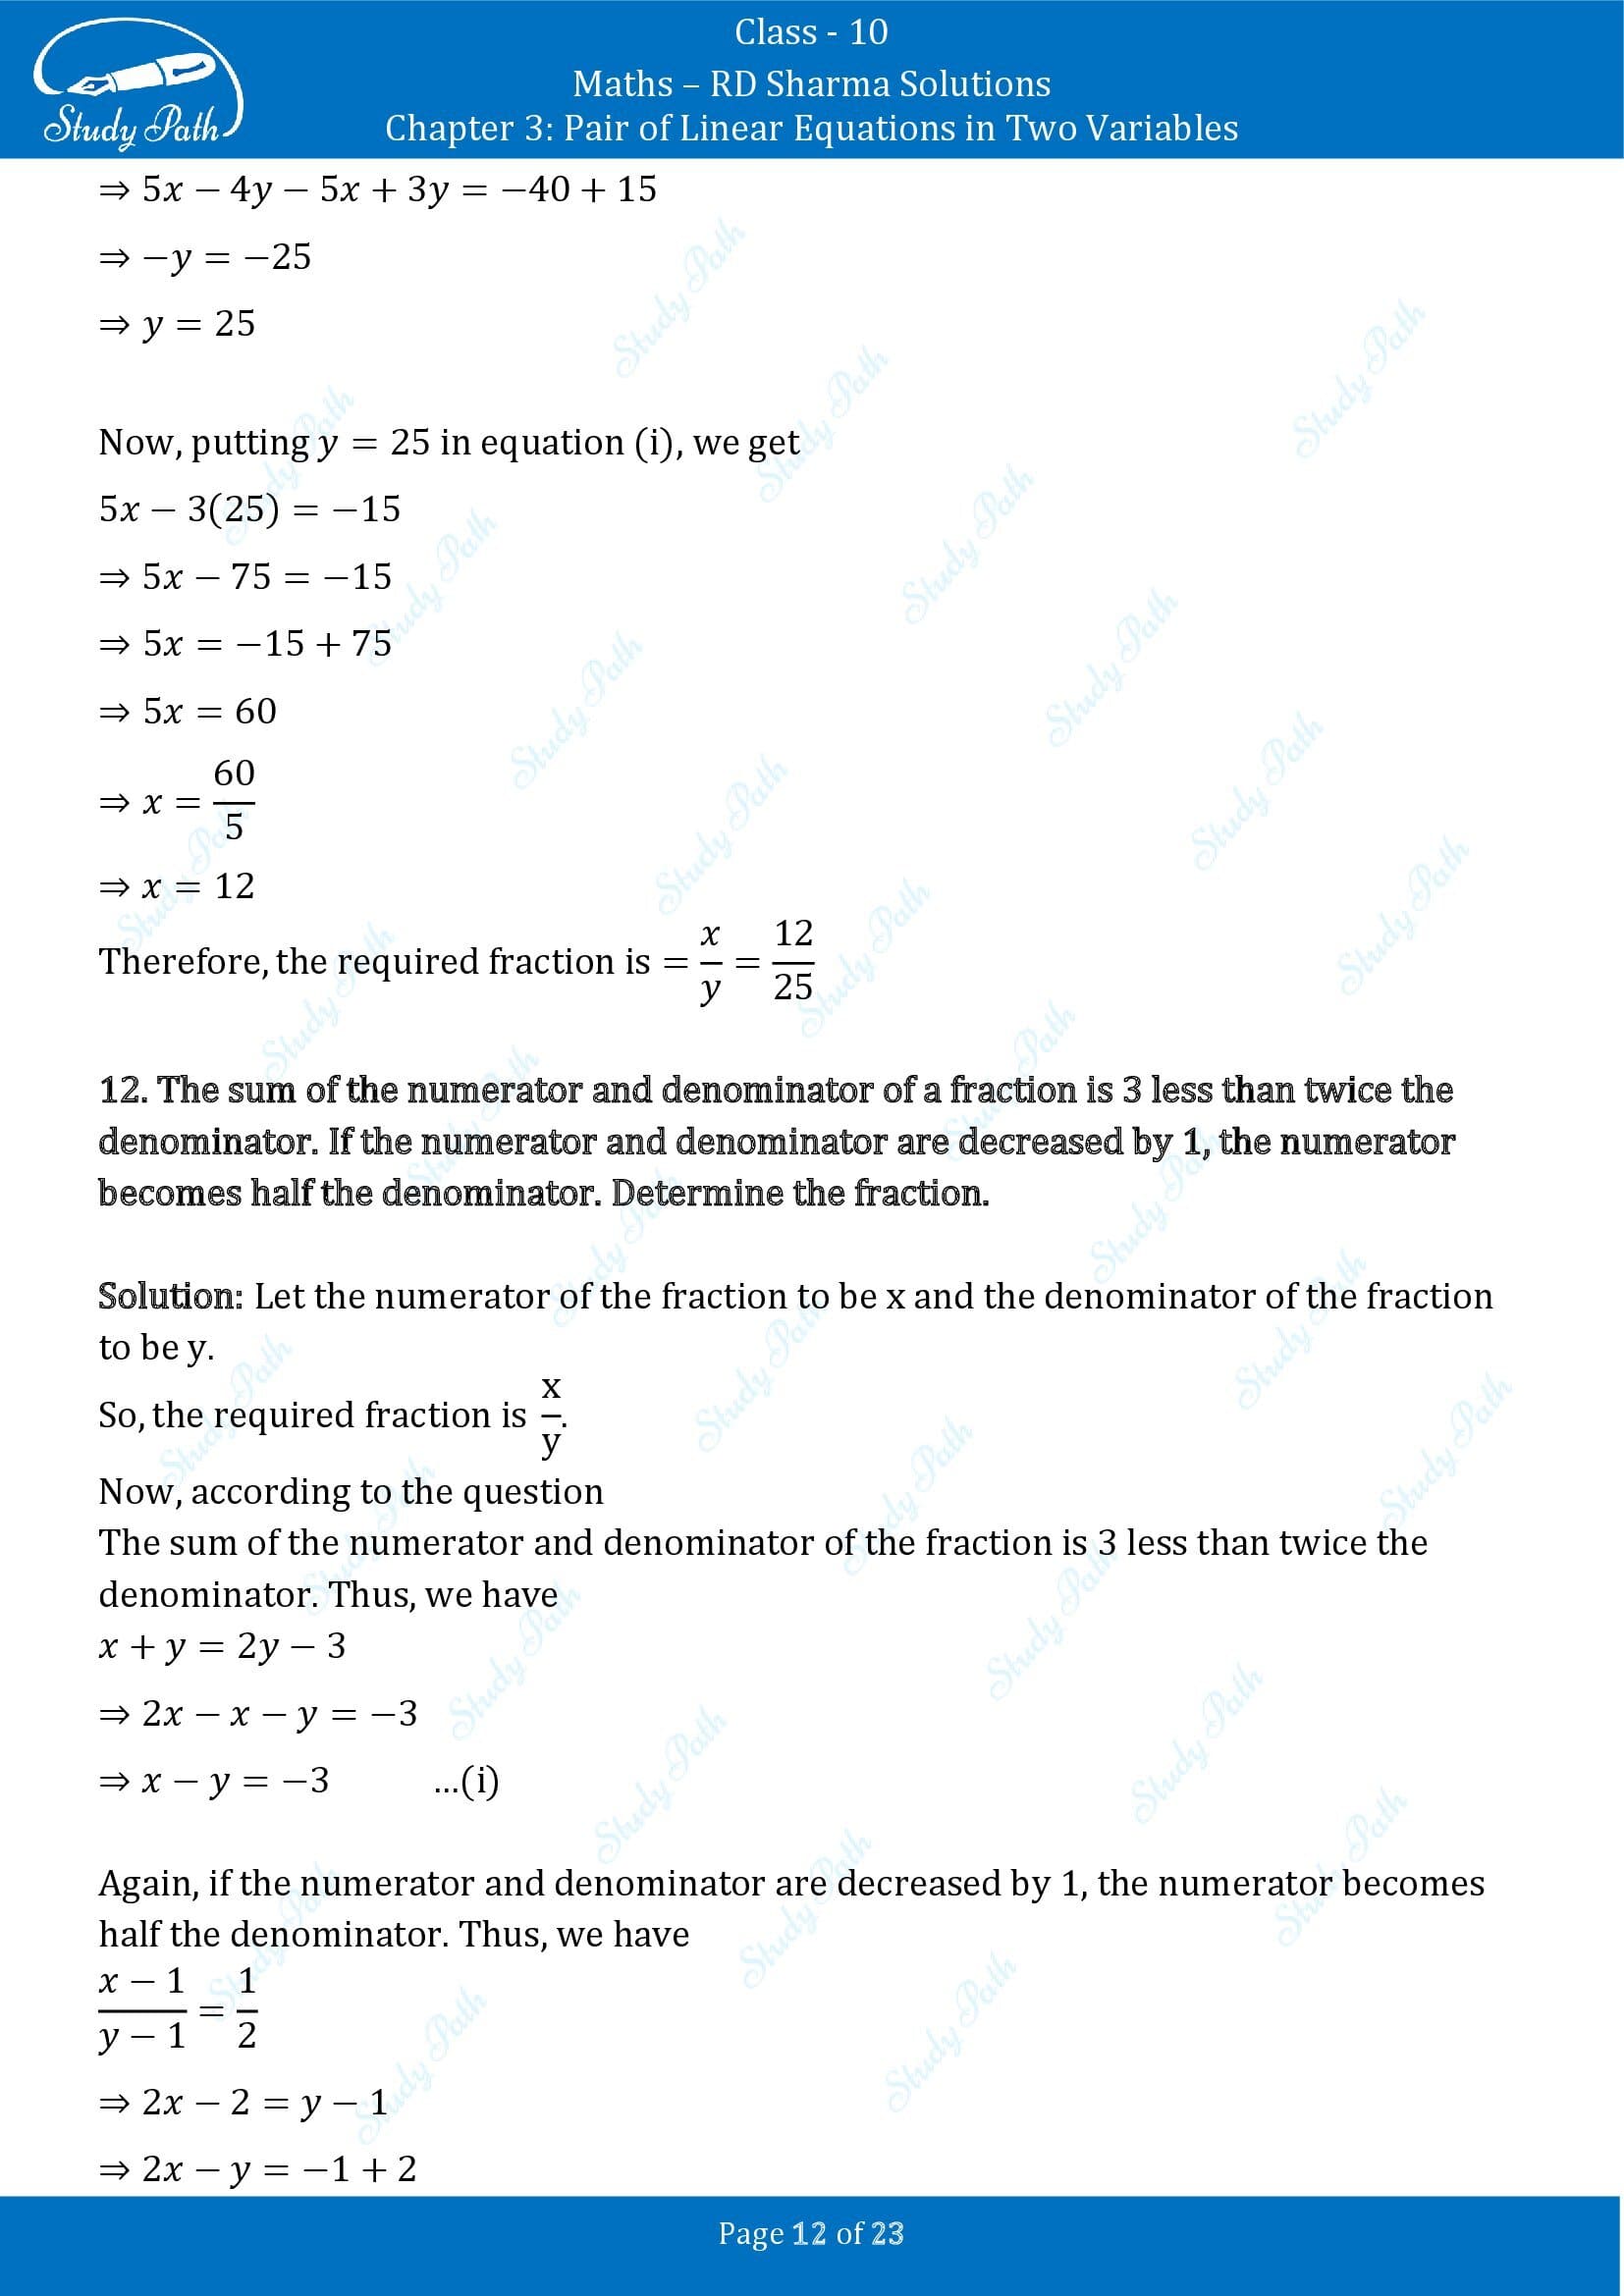 RD Sharma Solutions Class 10 Chapter 3 Pair of Linear Equations in Two Variables Exercise 3.8 00012